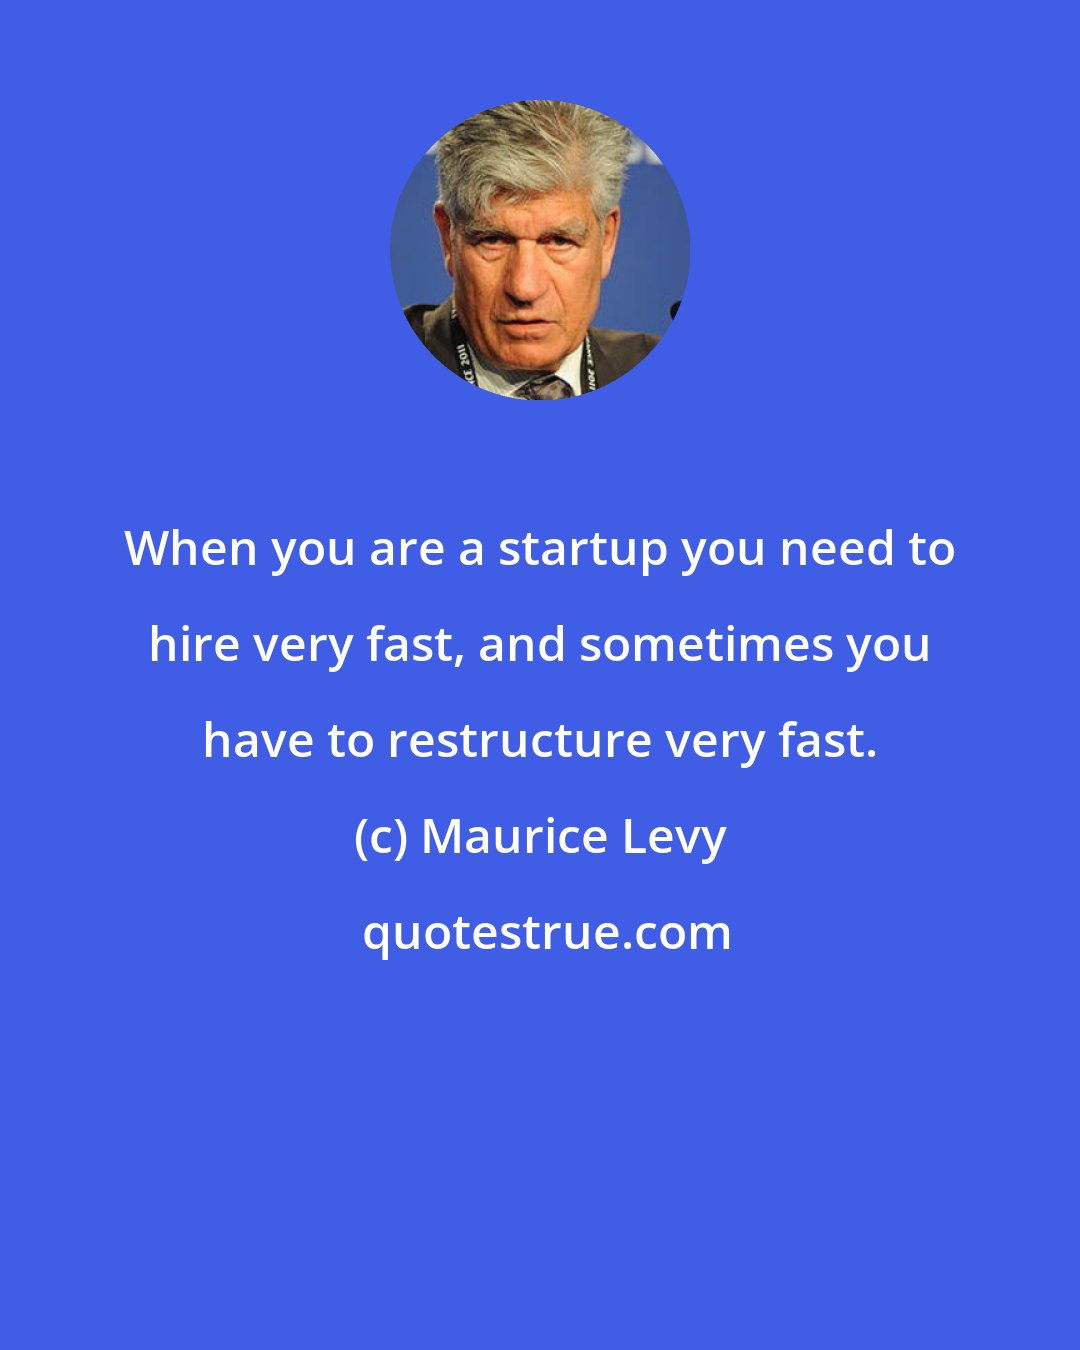 Maurice Levy: When you are a startup you need to hire very fast, and sometimes you have to restructure very fast.